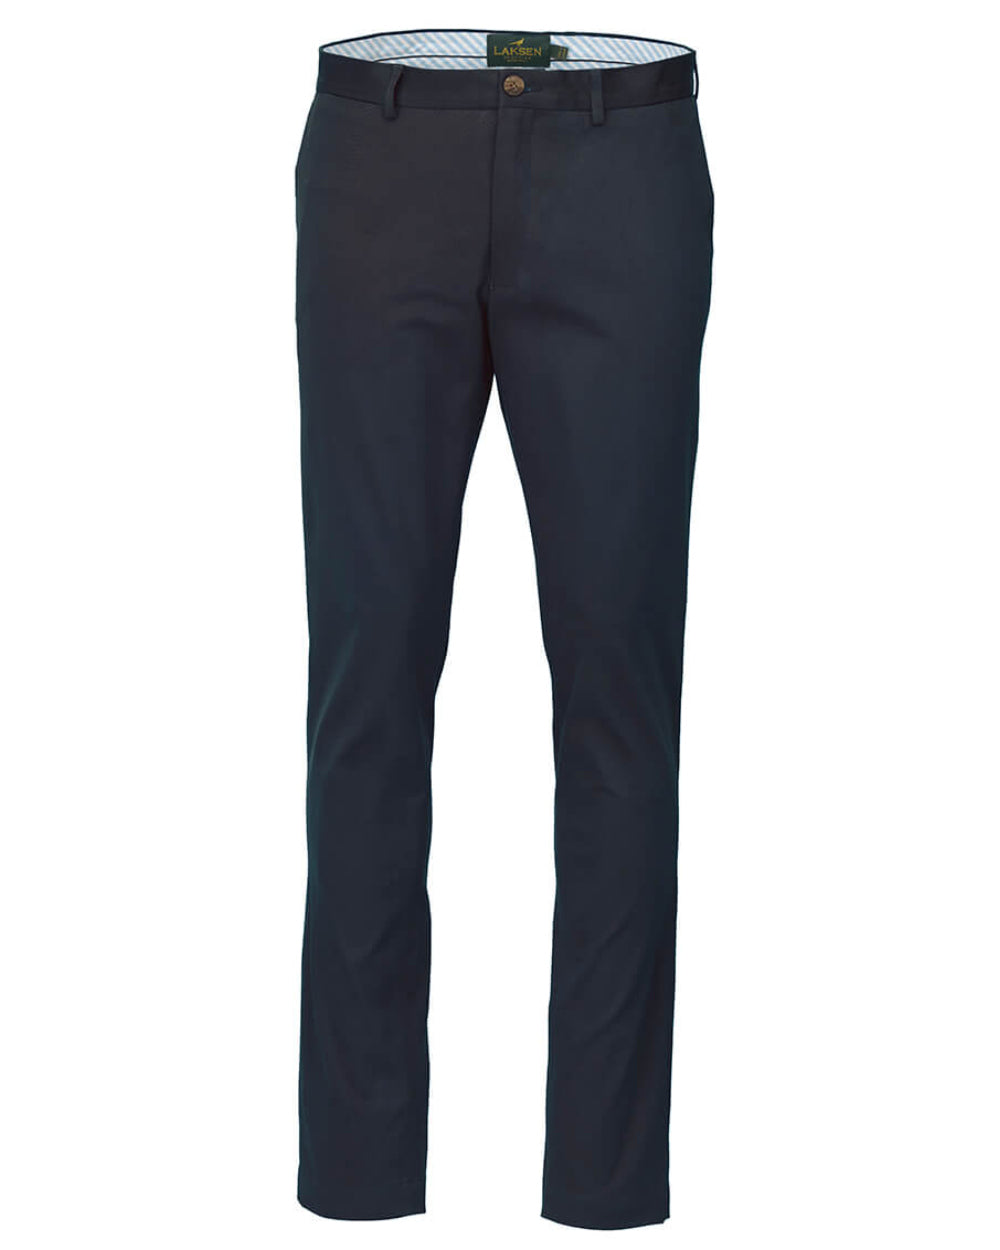 Navy Coloured Laksen Lumley Chino Trousers On A White Background 